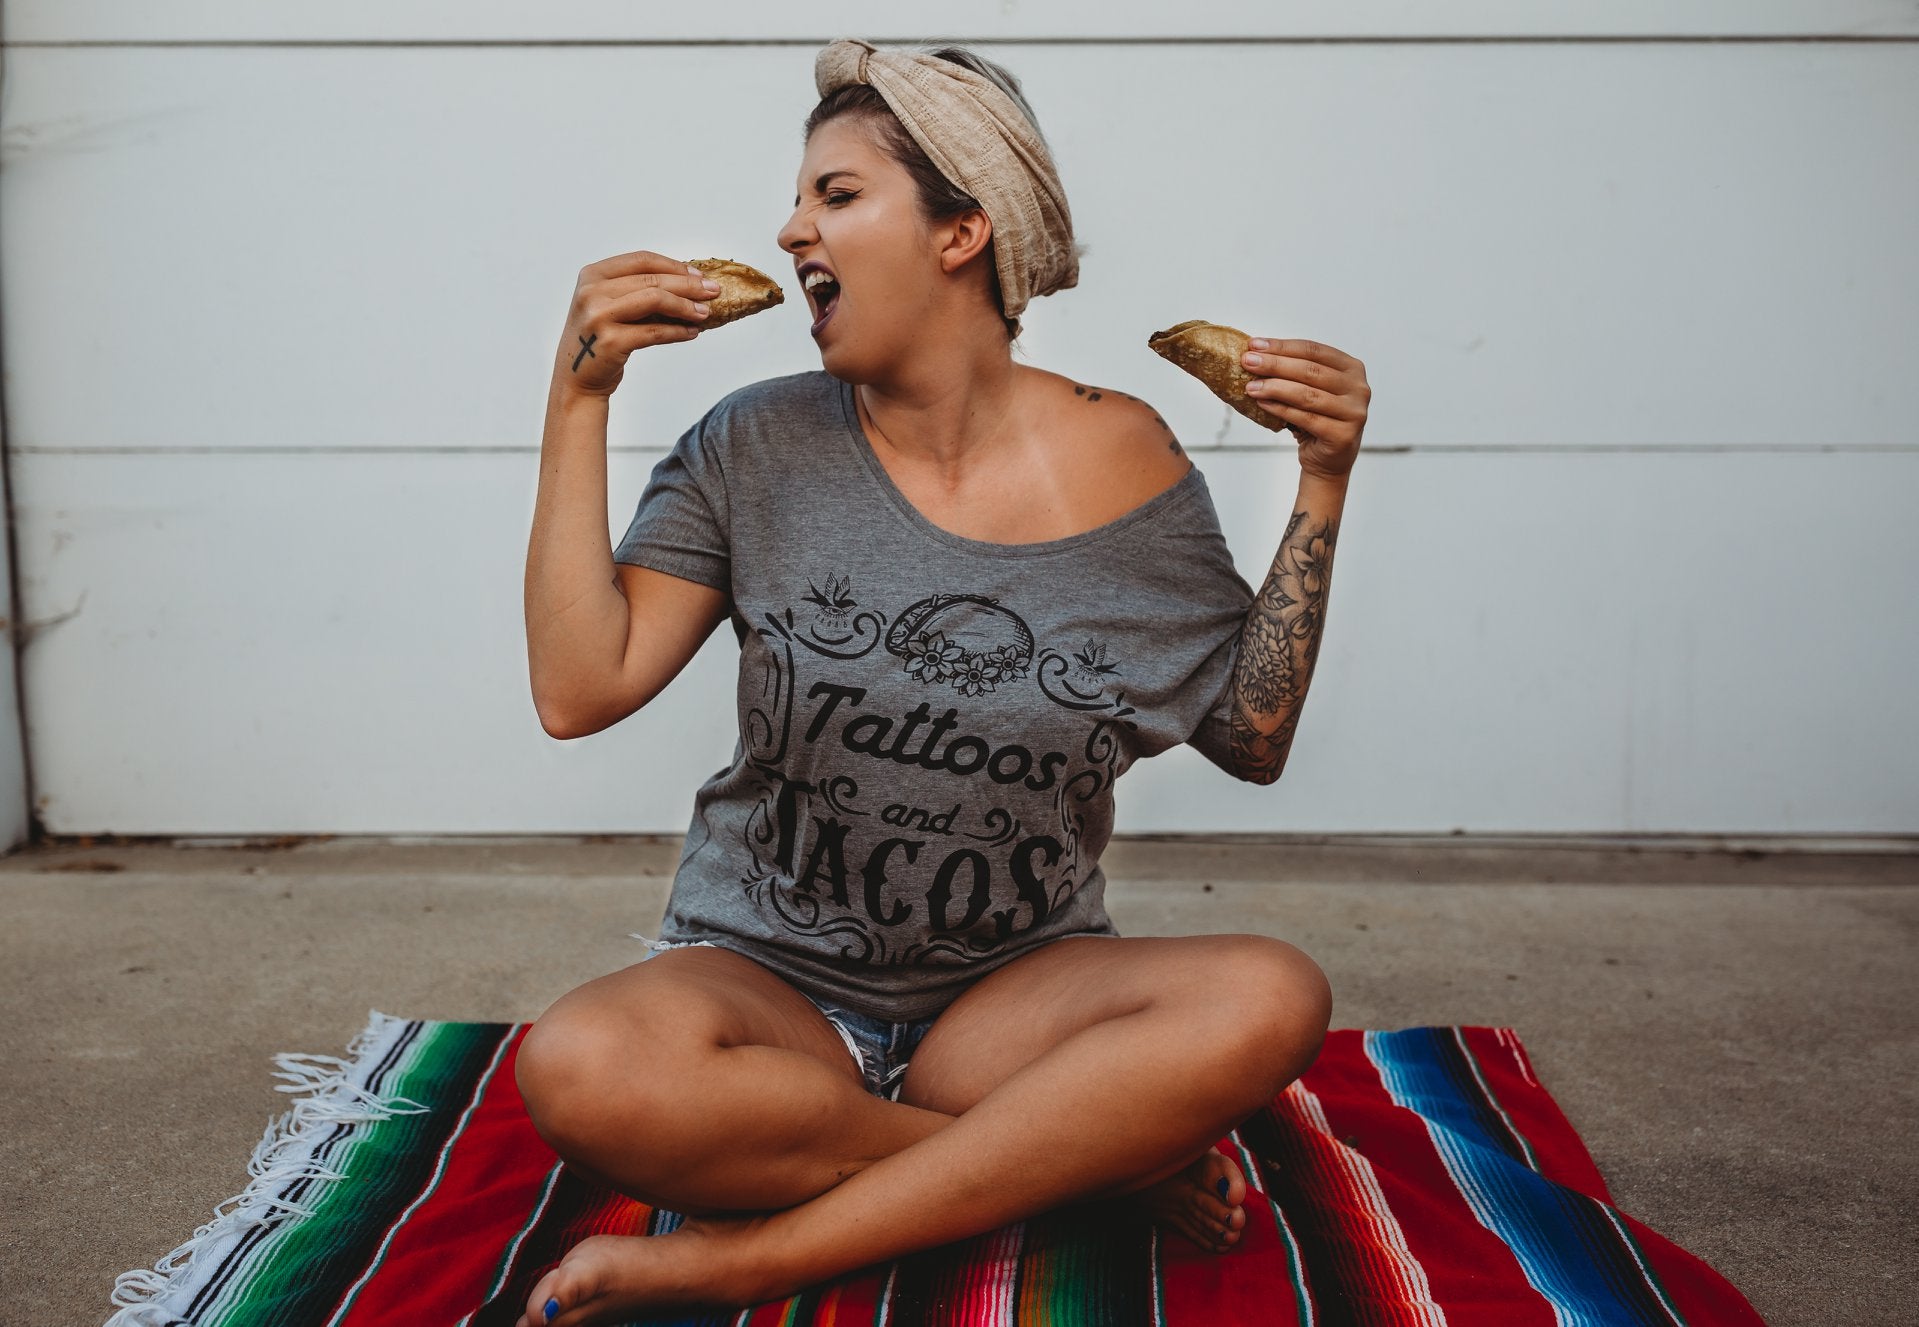 « TATTOOS AND TACOS » SLOUCHY TEE